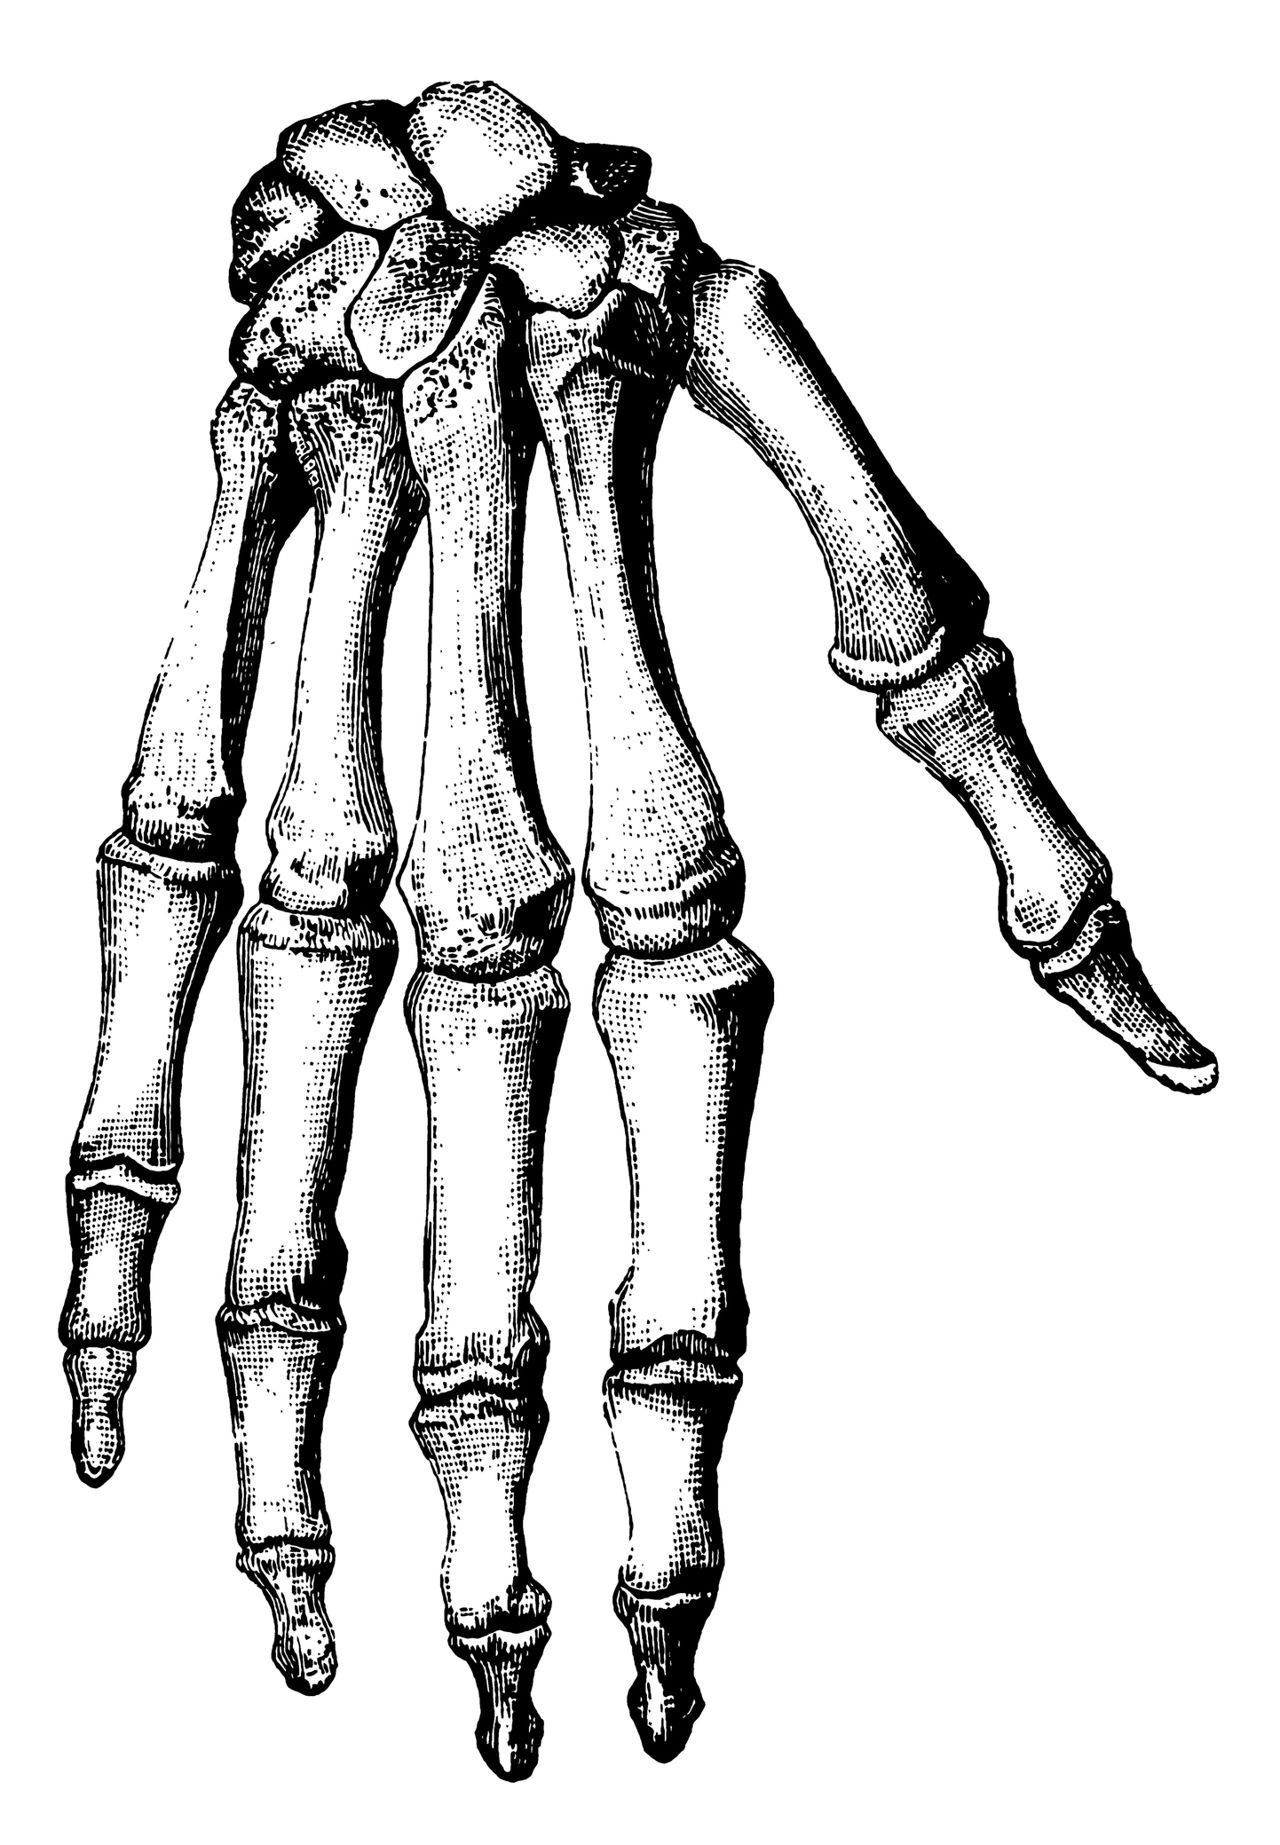 Hand Bones Anatomy Coloring Pages